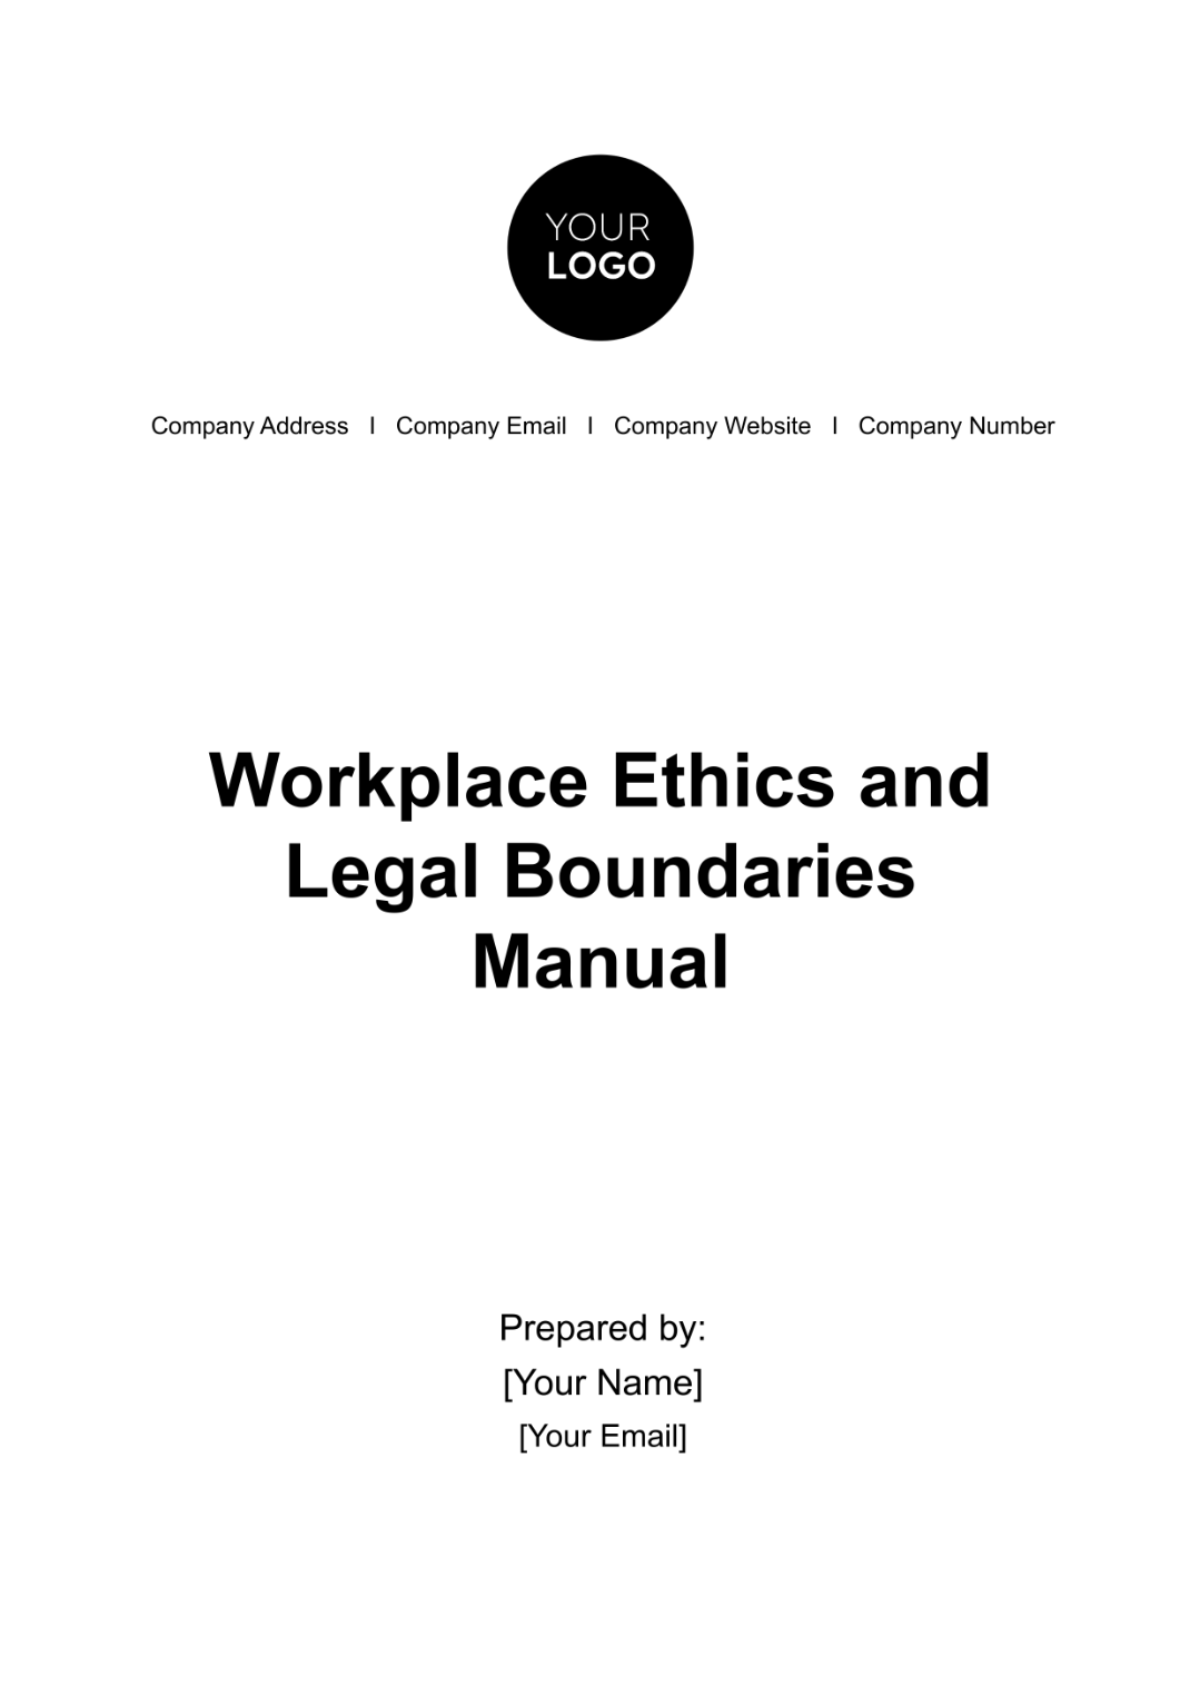 Free Workplace Ethics and Legal Boundaries Manual HR Template